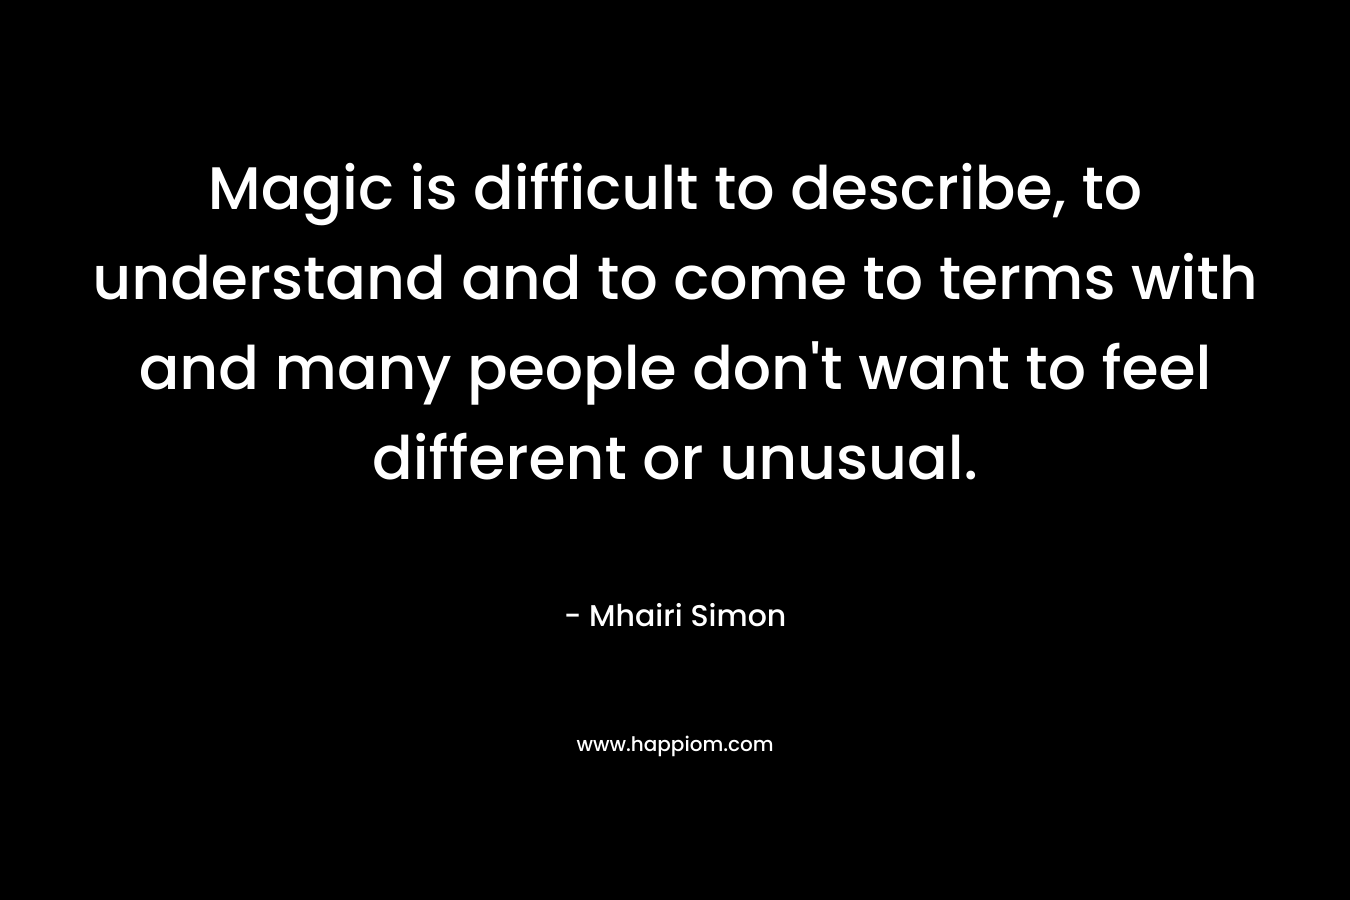 Magic is difficult to describe, to understand and to come to terms with and many people don’t want to feel different or unusual. – Mhairi Simon